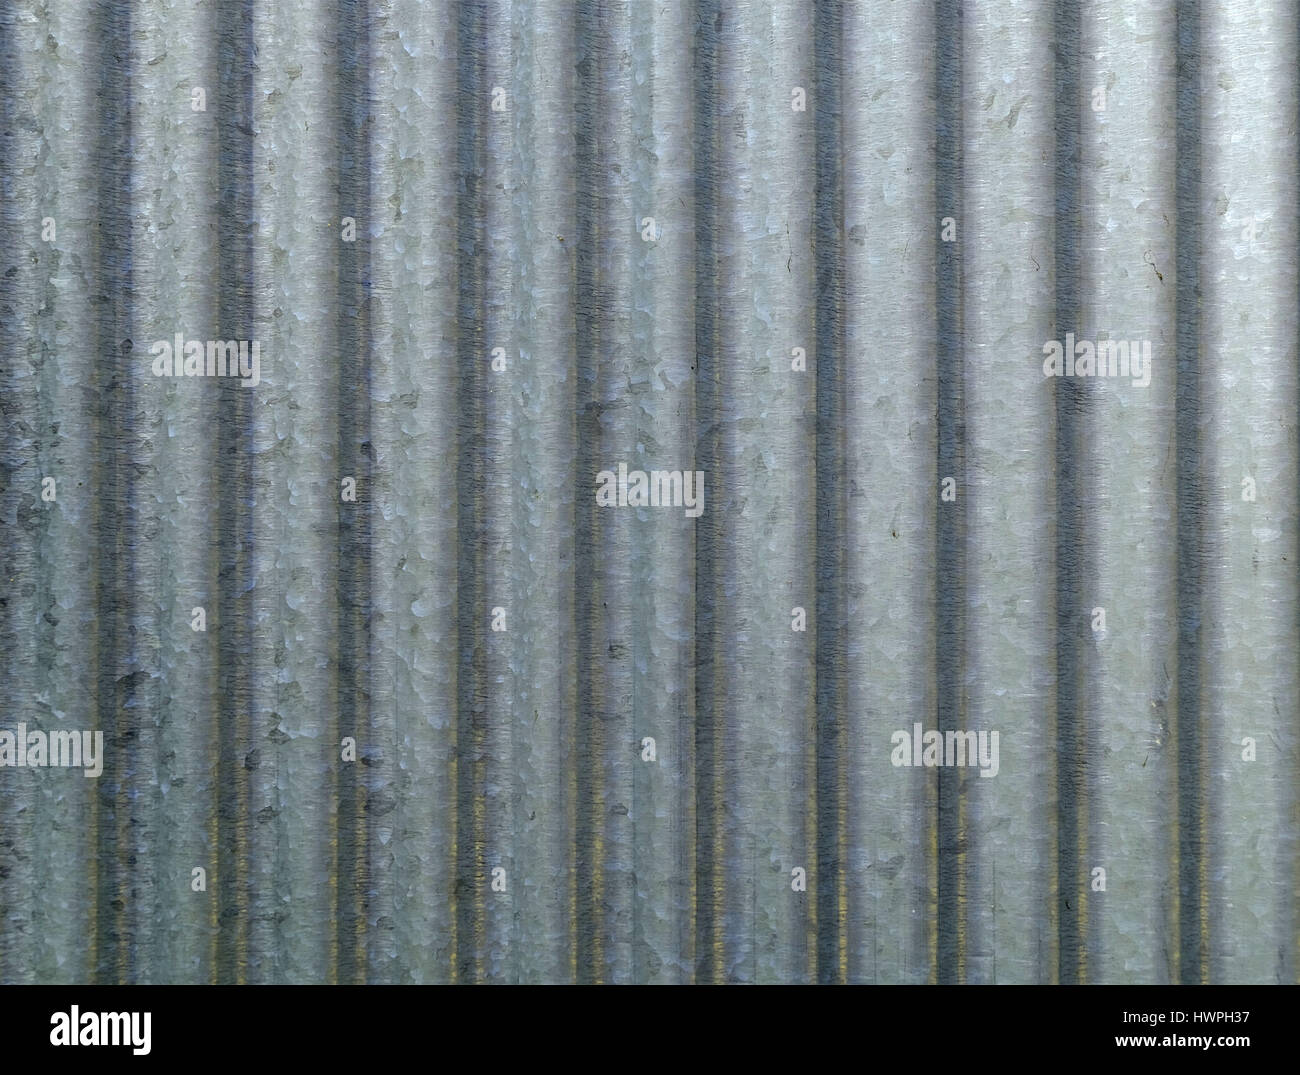 Corrugated metal galvanized wall plate background. Stock Photo